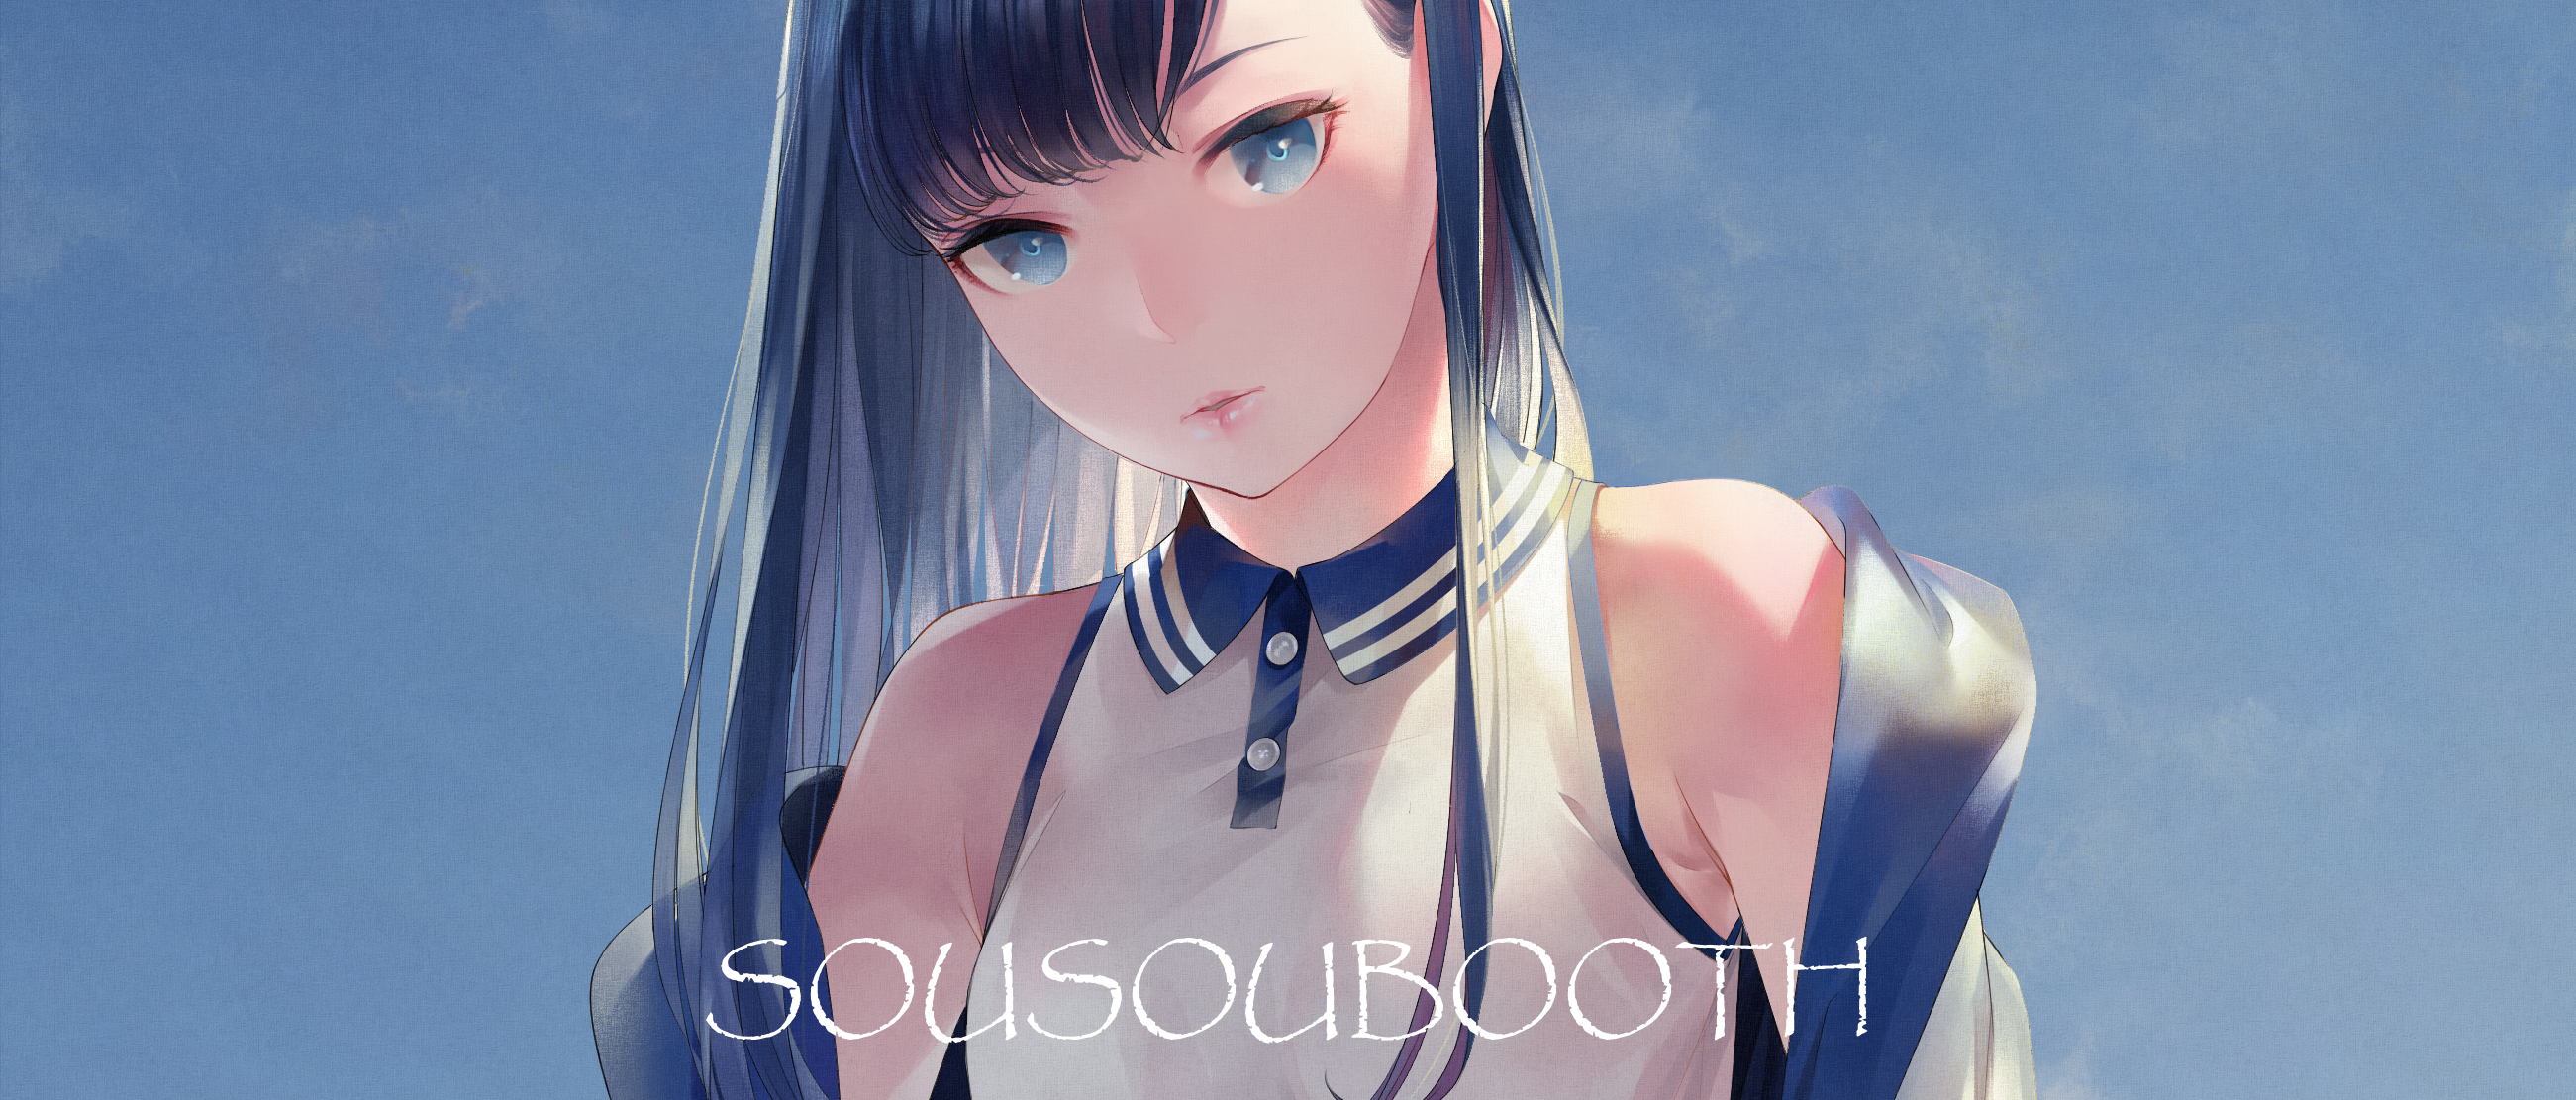 sousoubooth